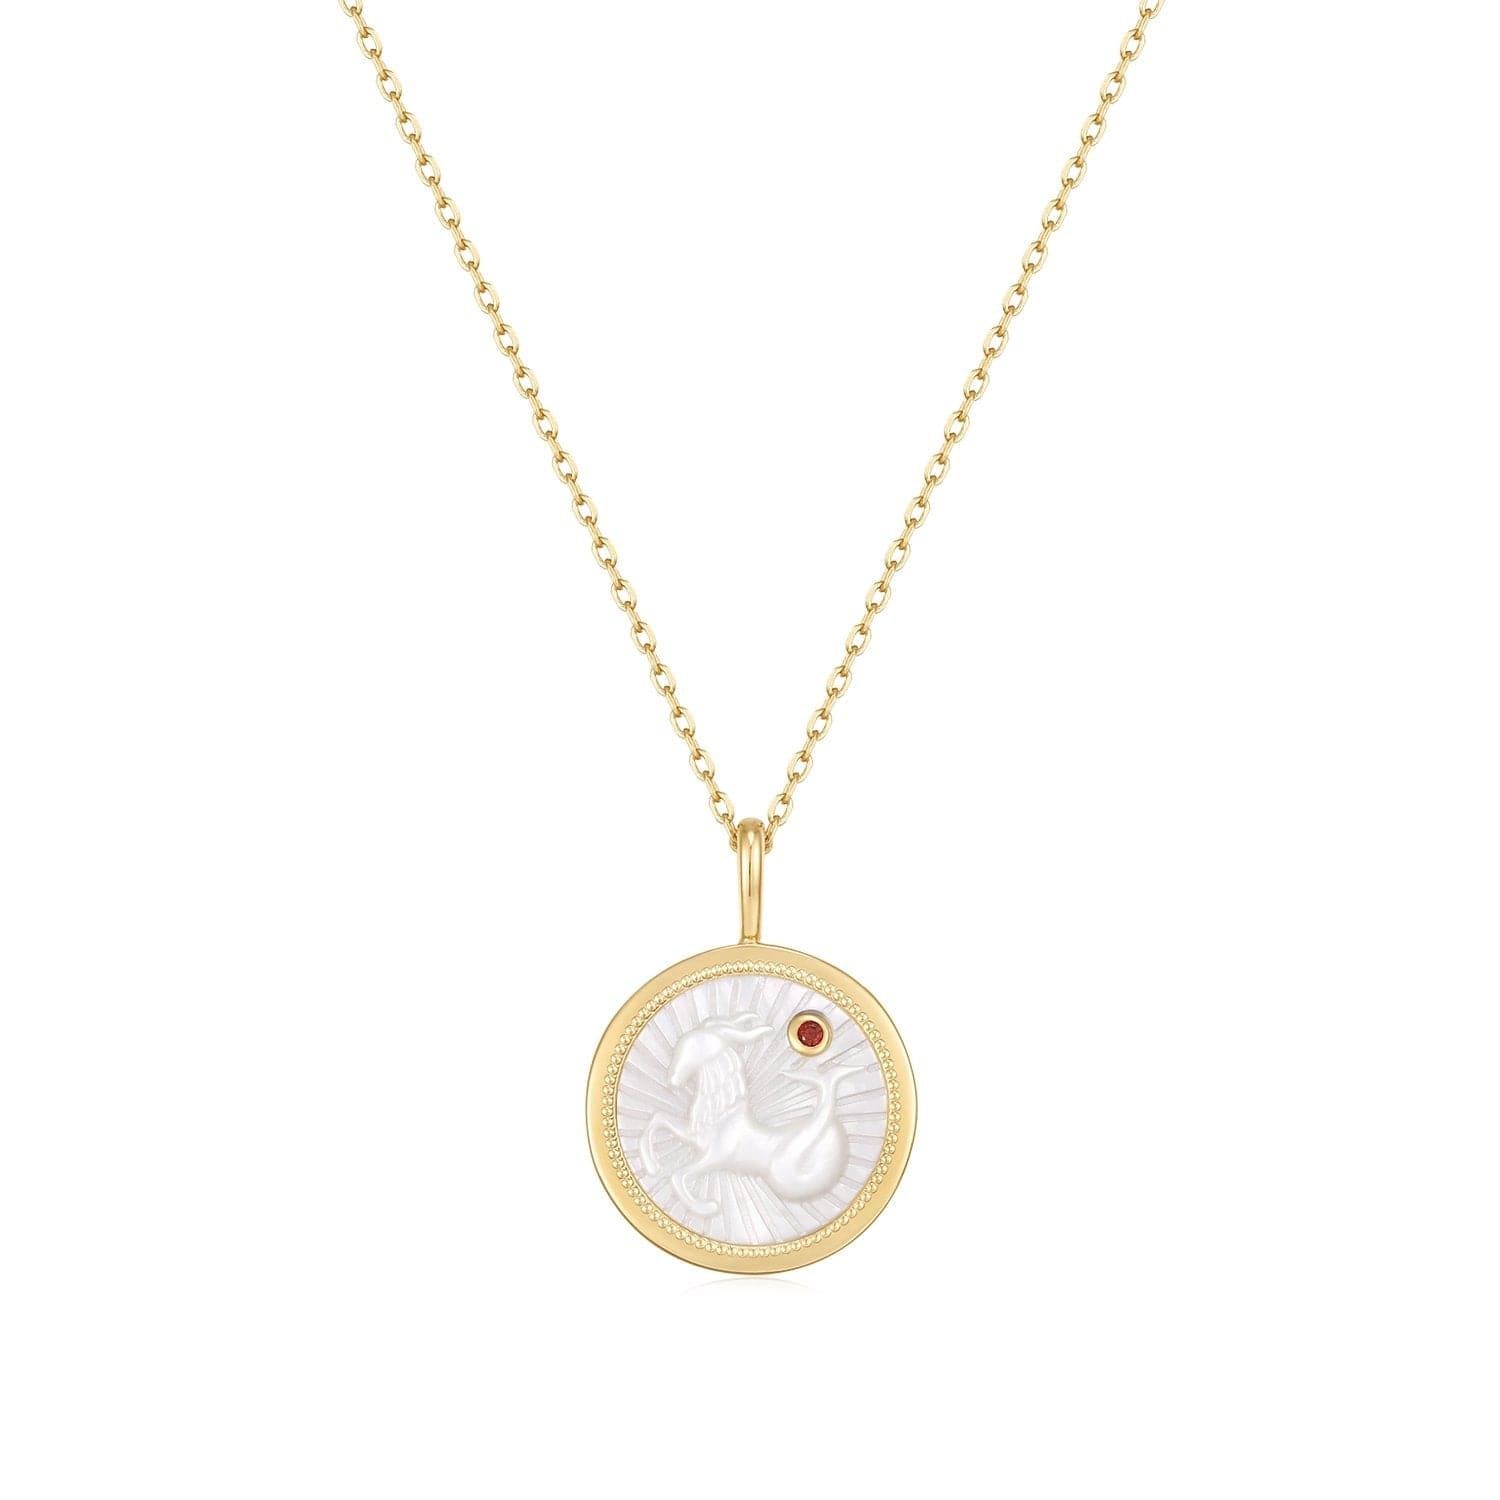 a gold necklace with a white mother's day pendant